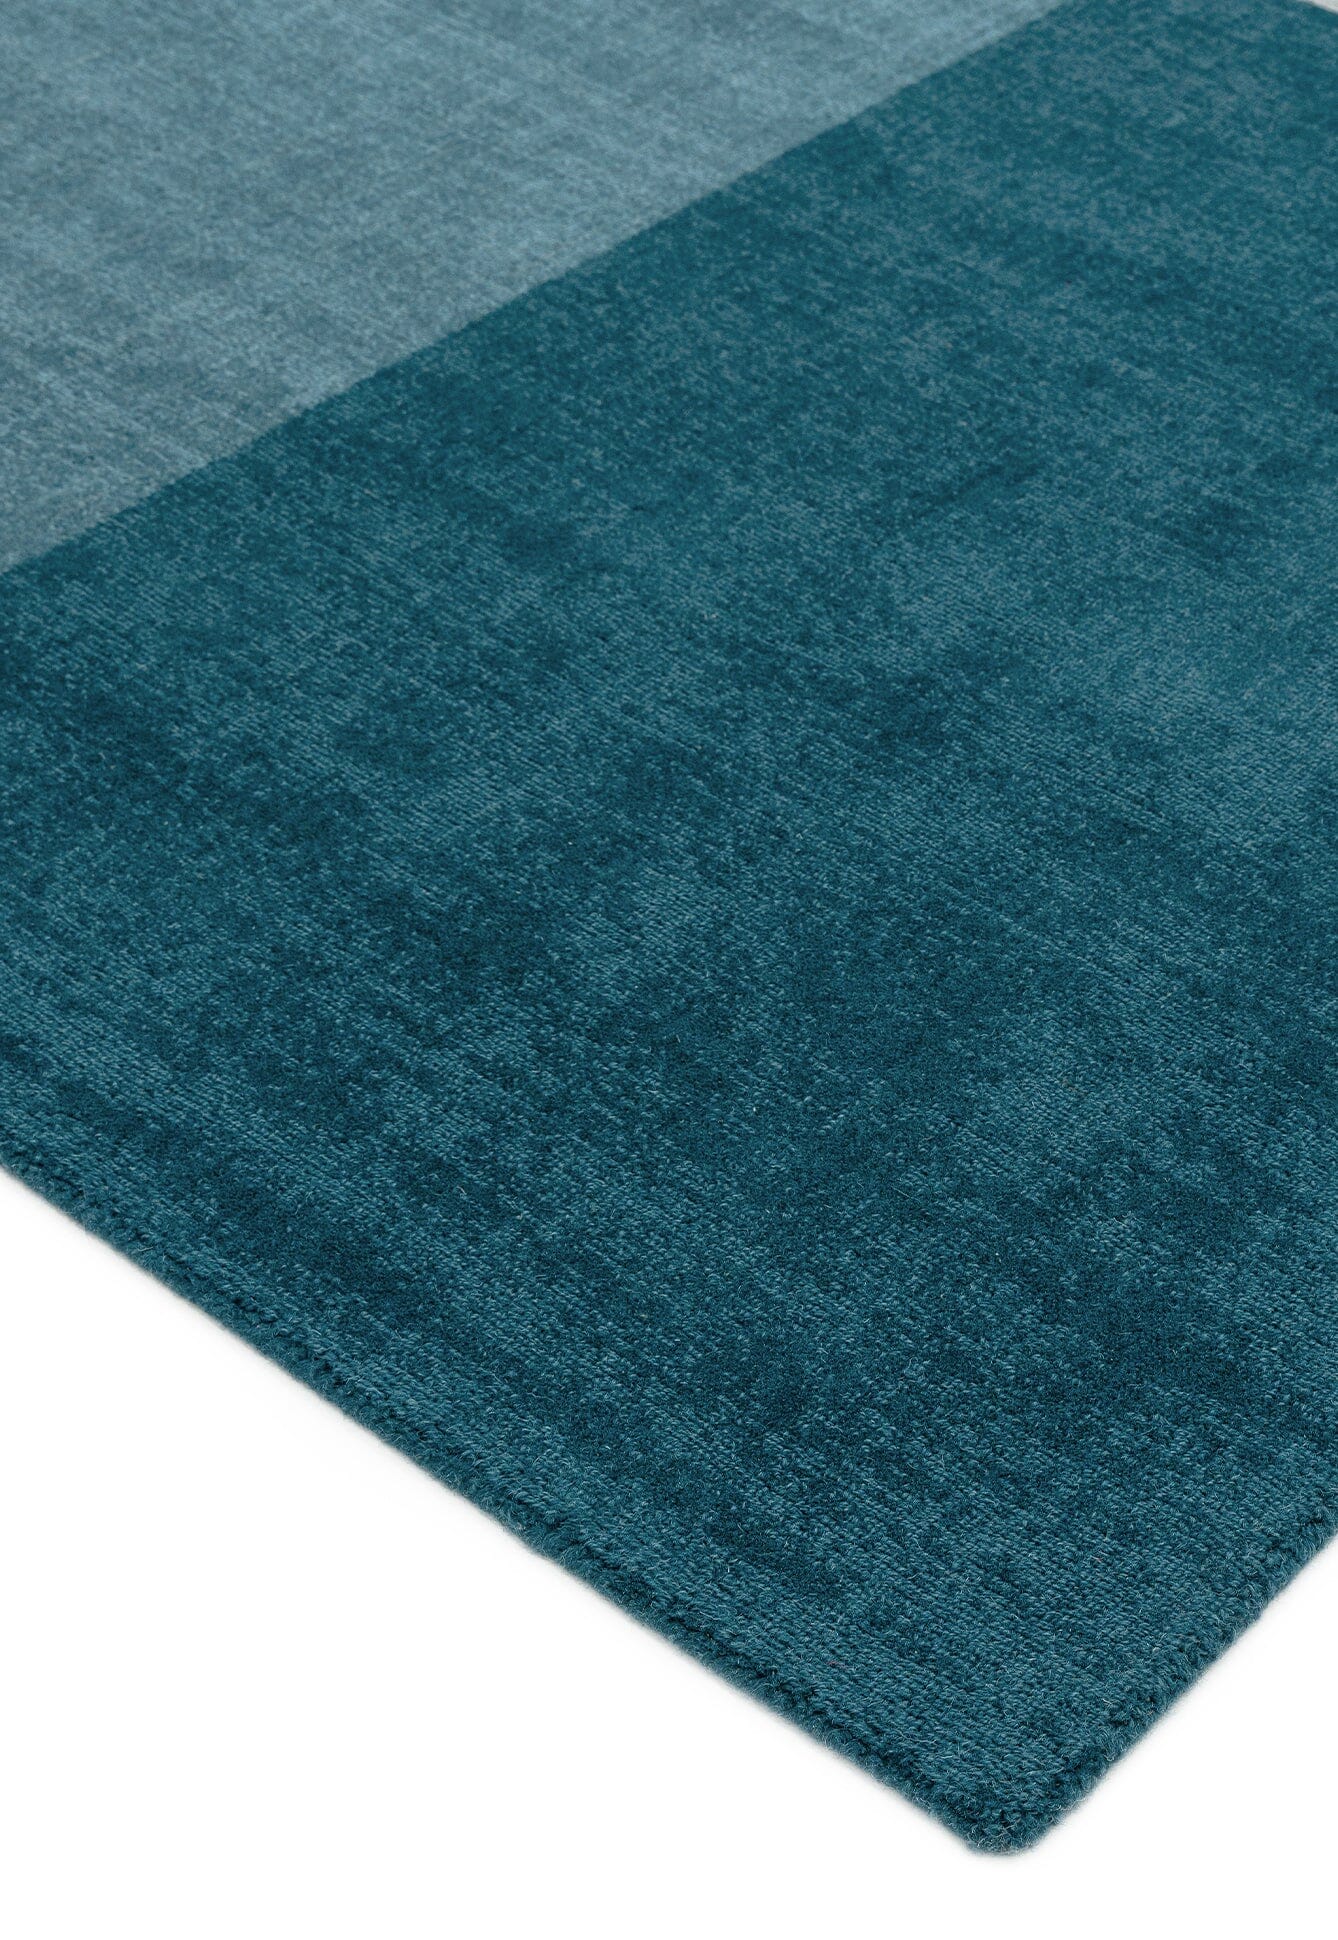  Asiatic Carpets-Asiatic Carpets Blox Hand Woven Rug Teal - 120 x 170cm-Multicoloured 941 